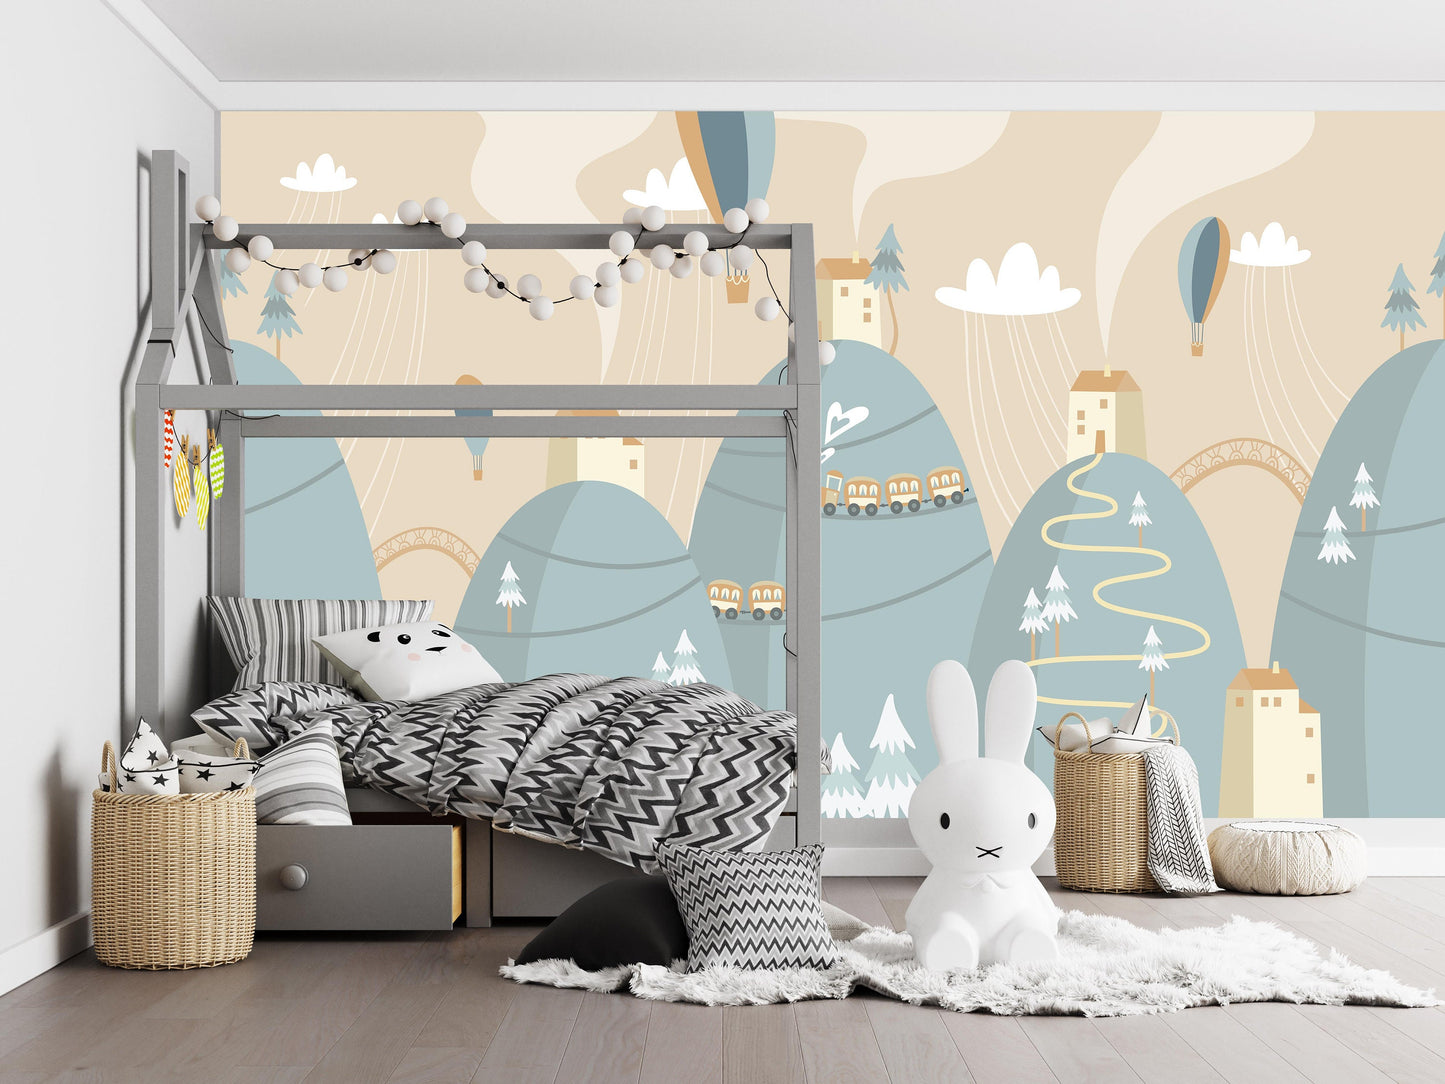 Removable Peel and Stick Wallpaper Mountains Railway Air Hot balloon Sky Nursery Wall Paper Wall Murals, KL0035